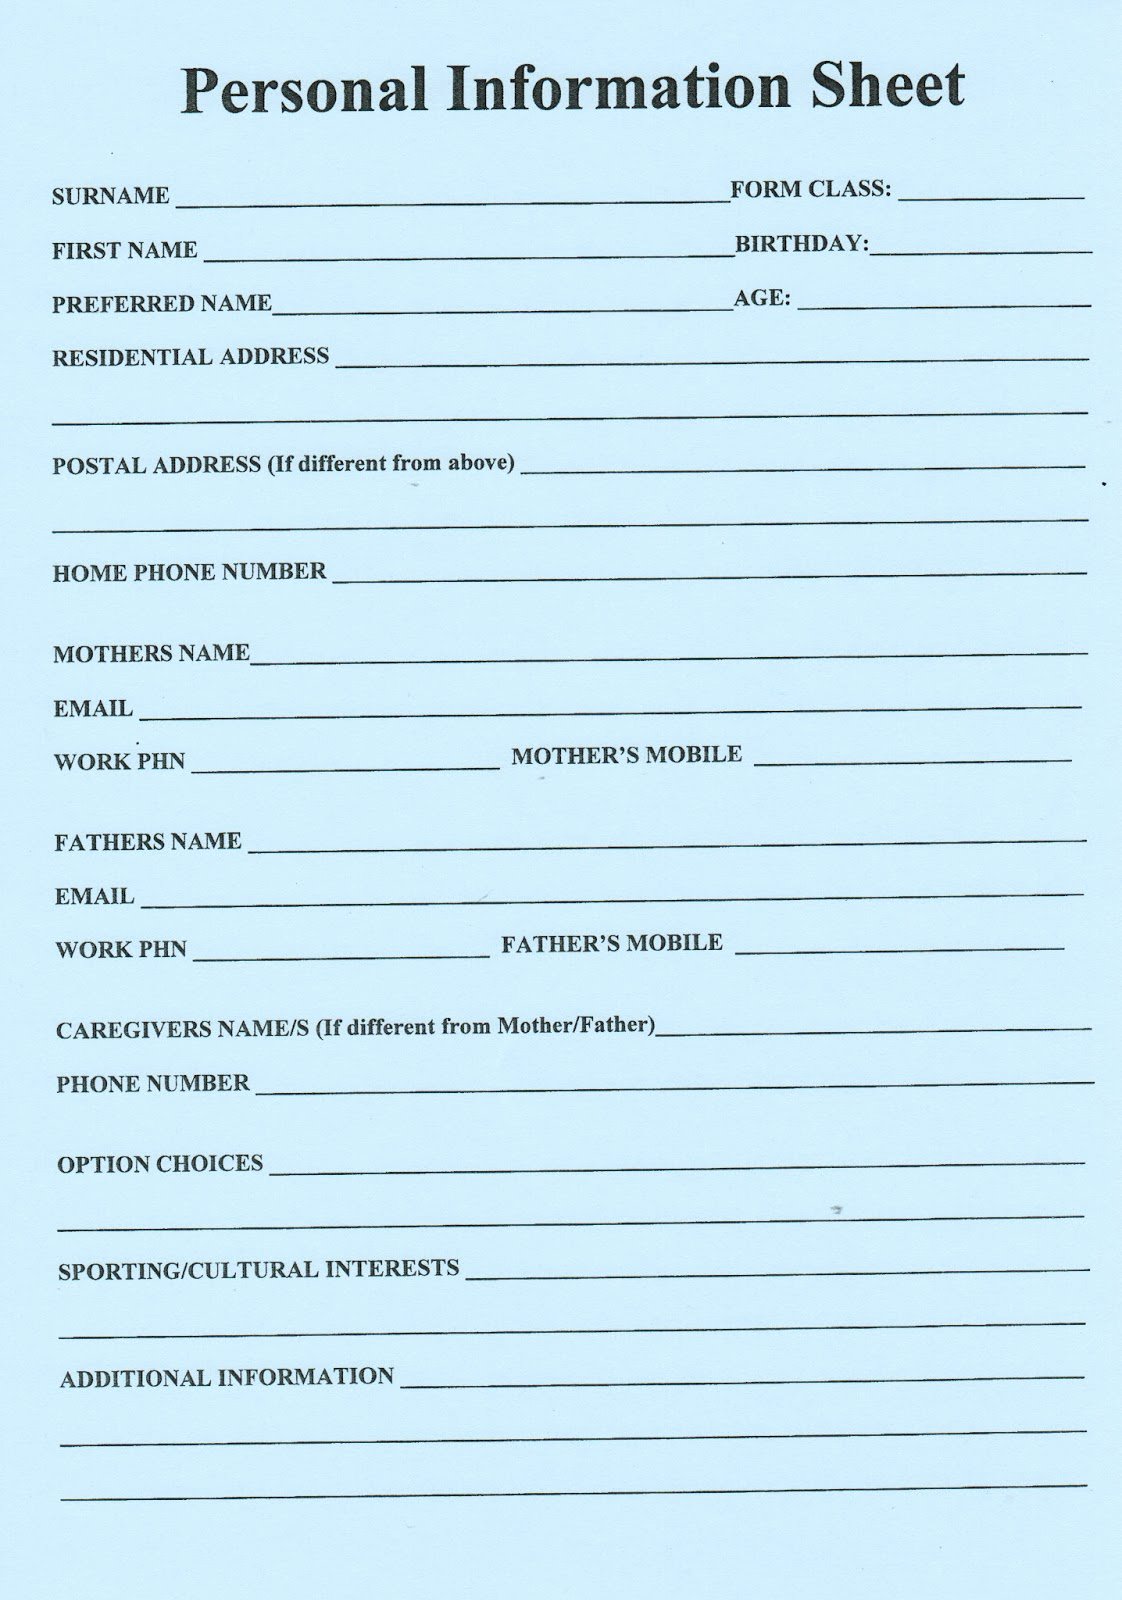 Personal Data Sheet forms Unique 12pywghs2013 Personal Information Sheet